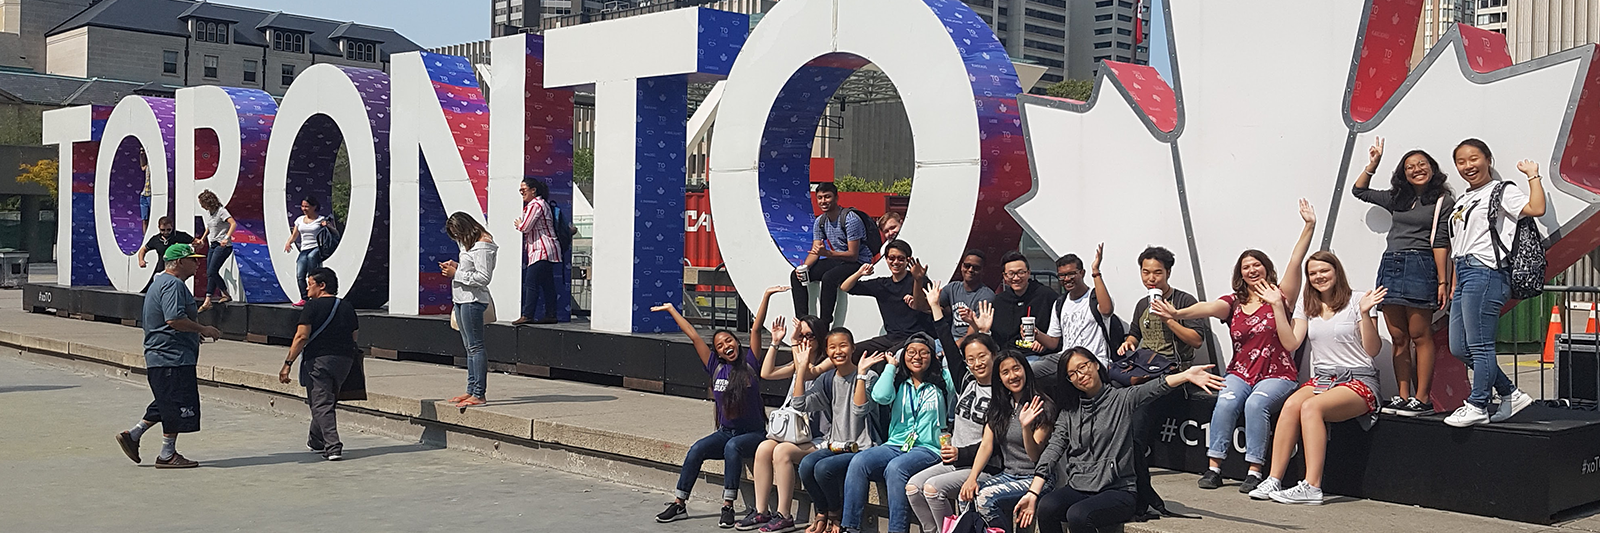 Students with Toronto sign